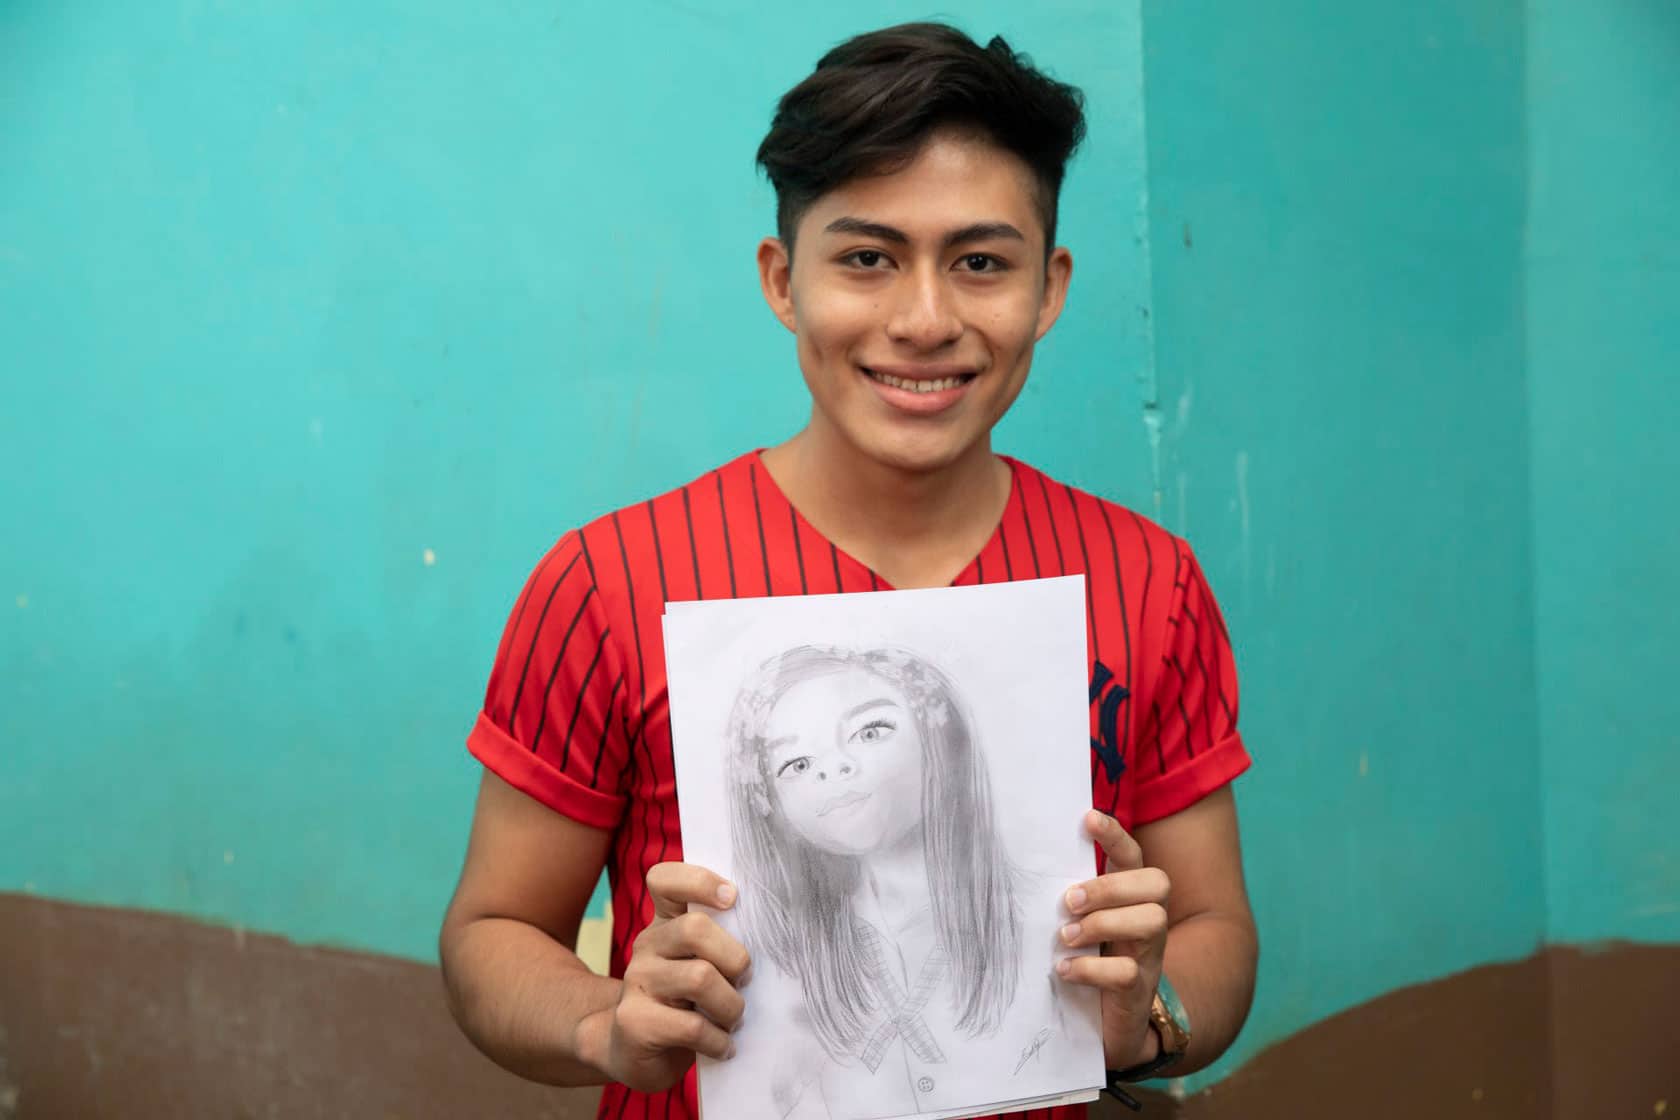 Omar from Honduras holds his drawing